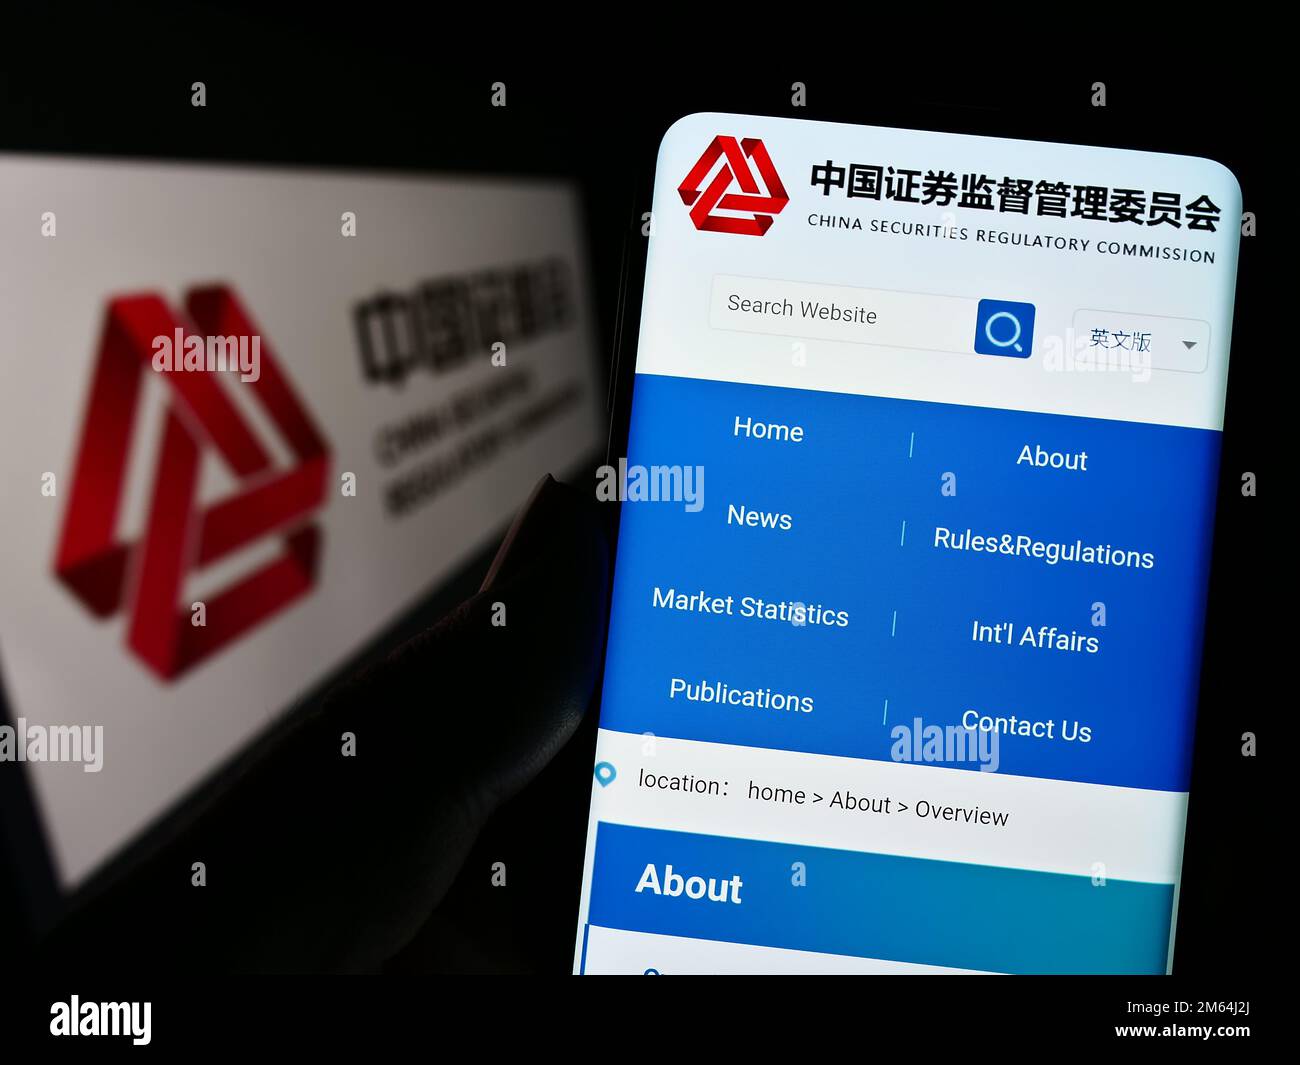 Person holding cellphone with website of China Securities Regulatory Commission (CSRC) on screen with logo. Focus on center of phone display. Stock Photo